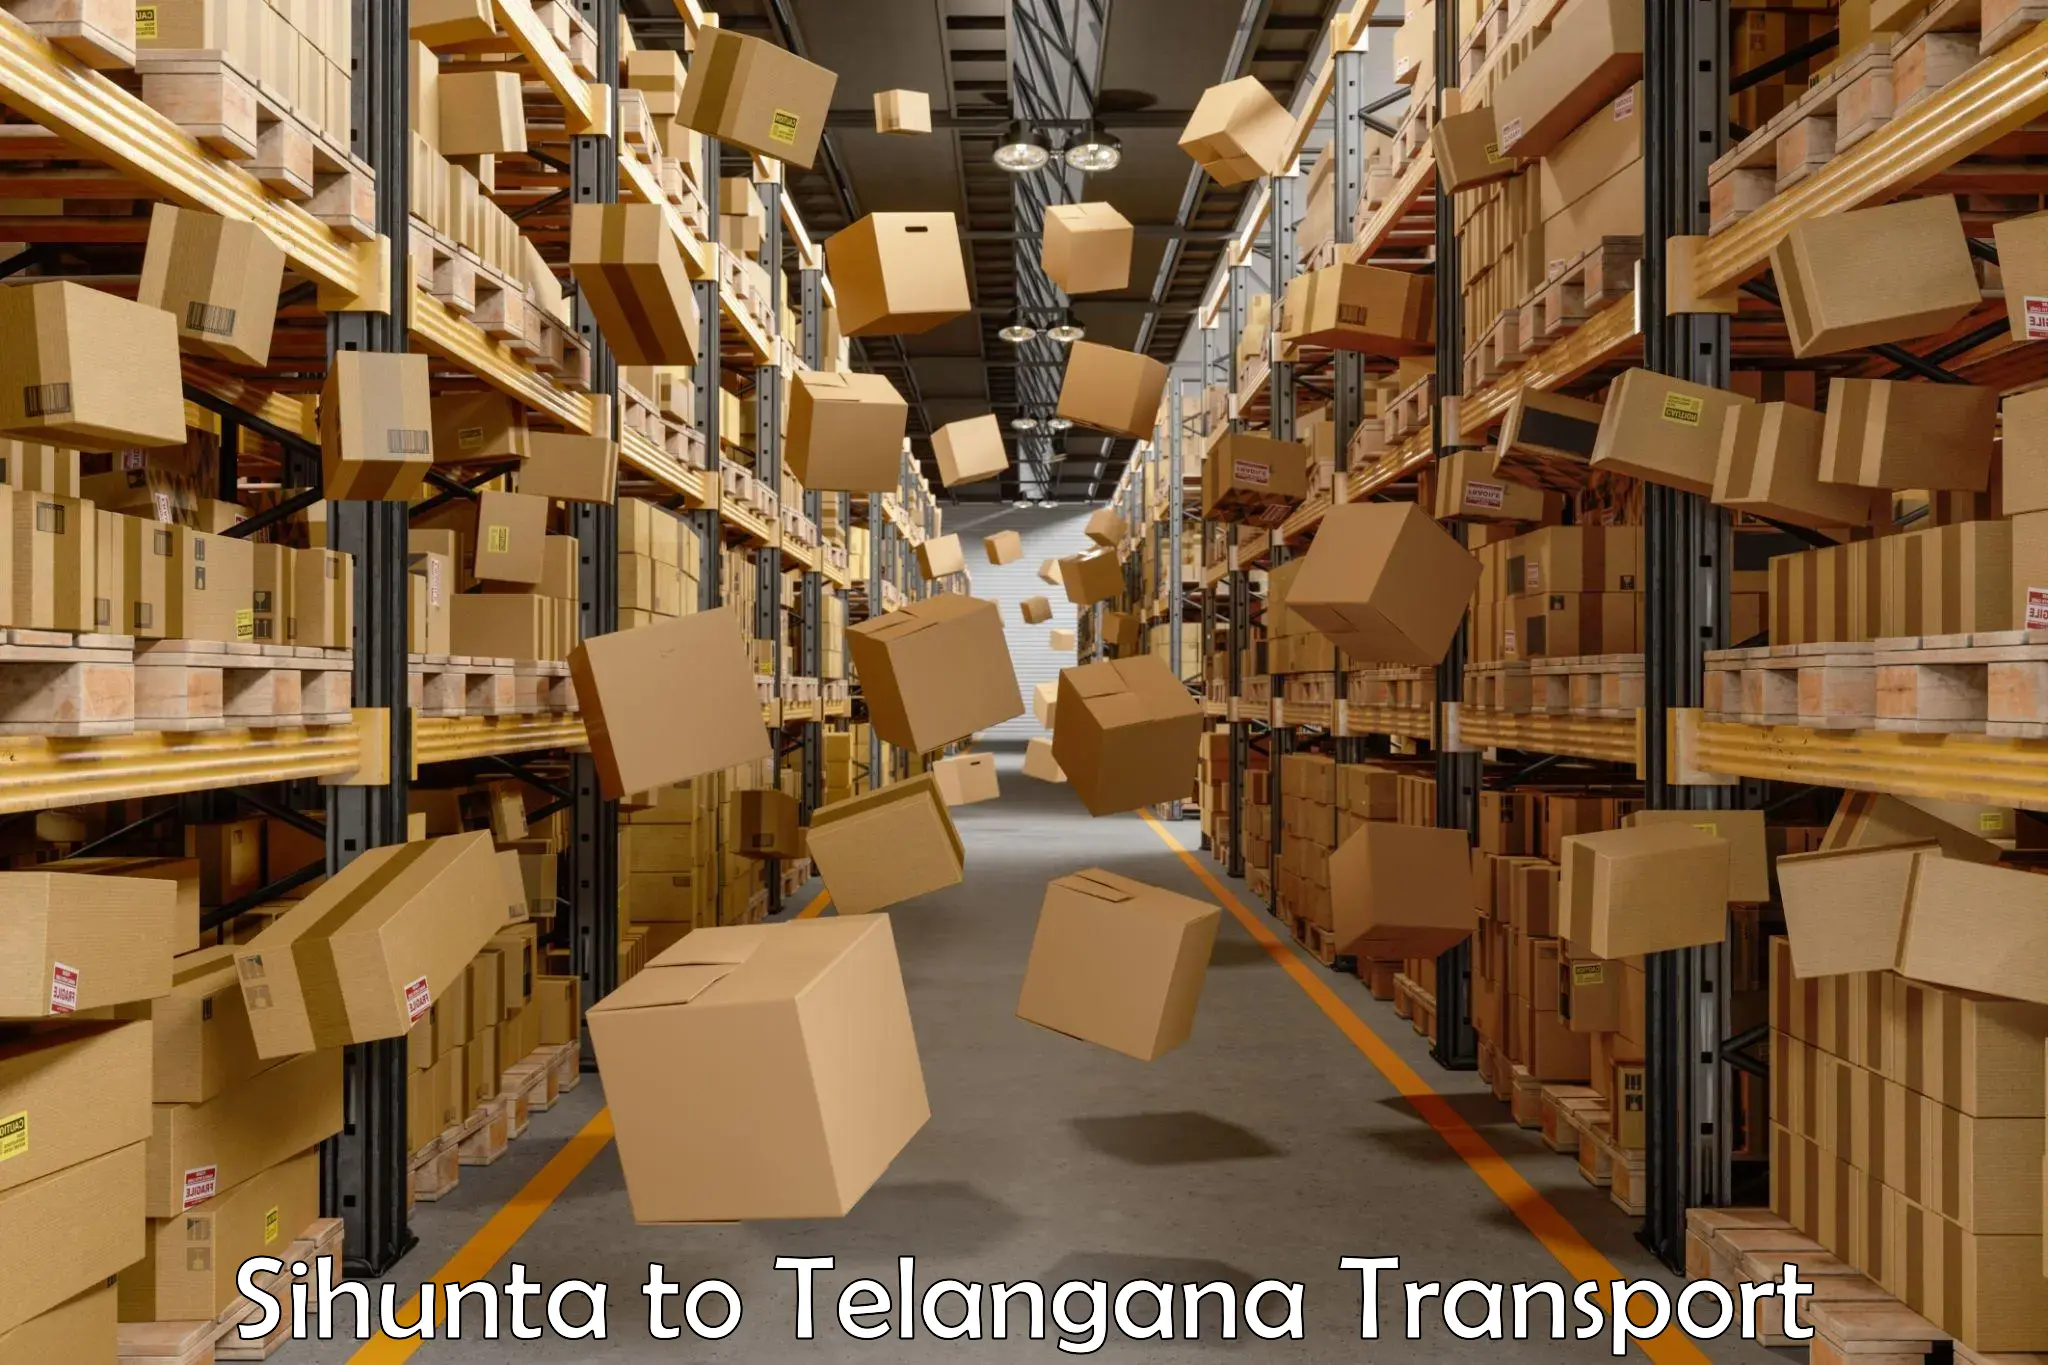 Commercial transport service in Sihunta to Telangana